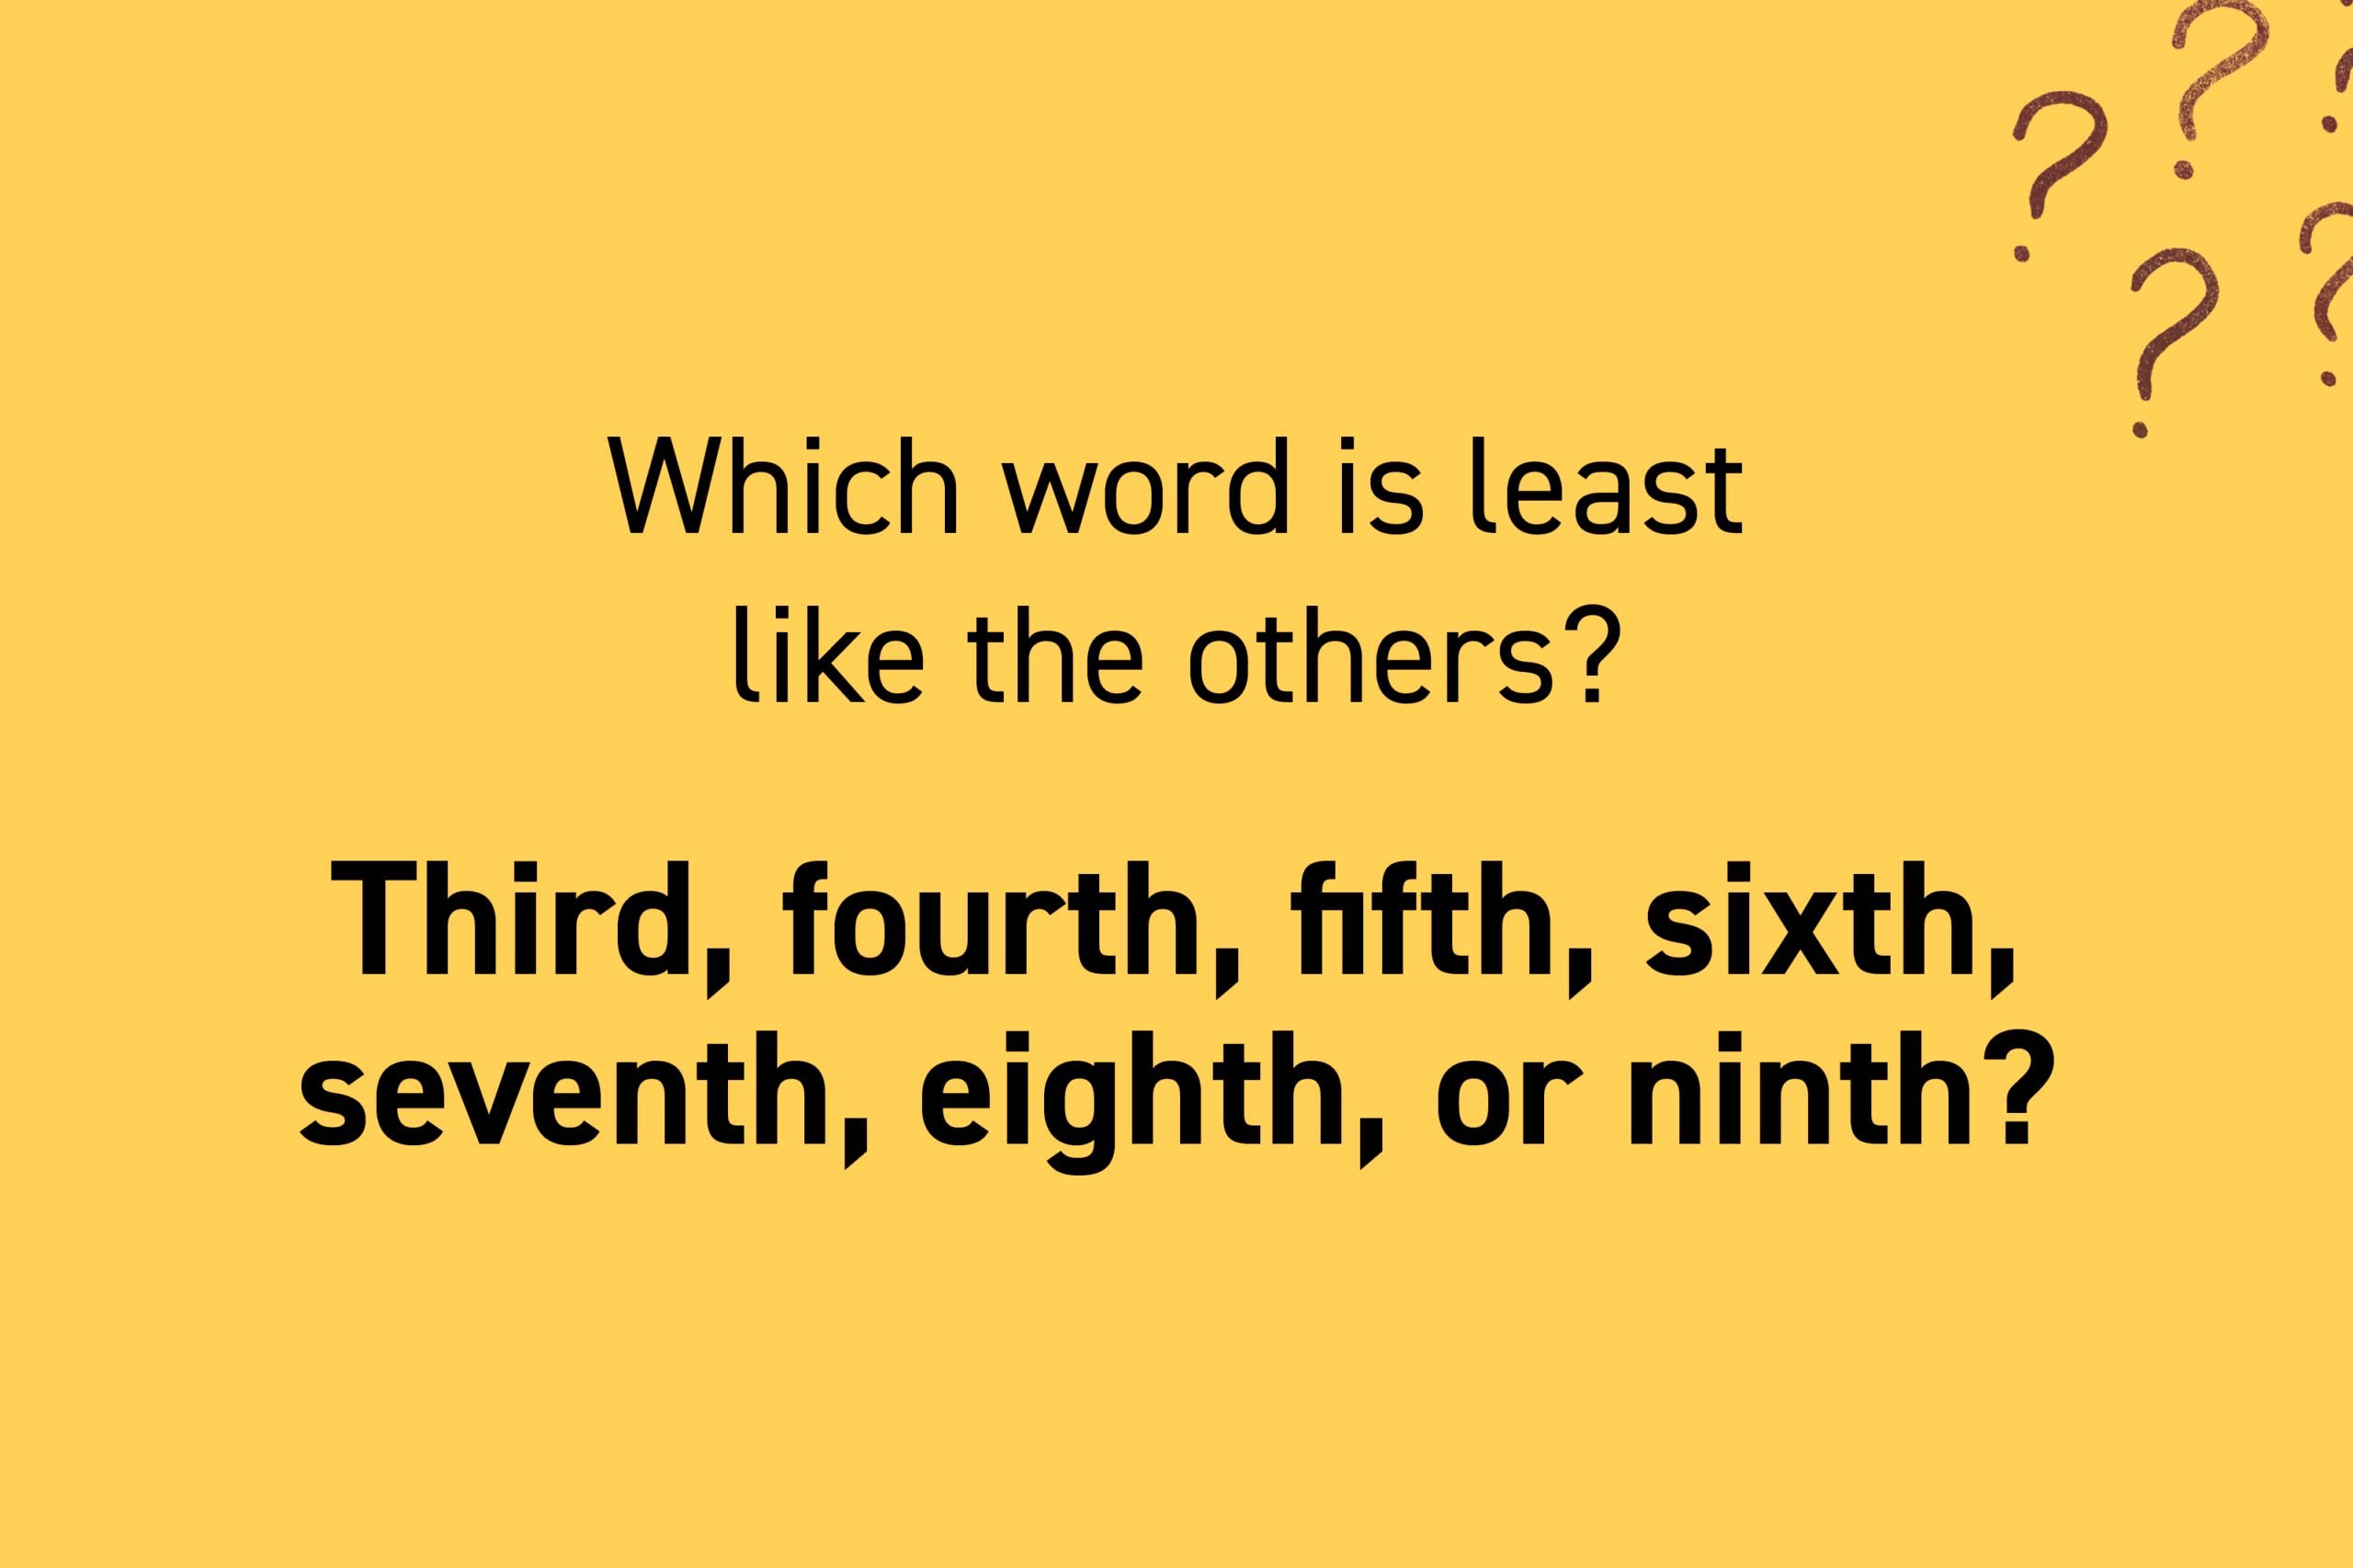 Which word is least like the others? Third, fourth, fifth, sixth, seventh, eighth, or ninth?